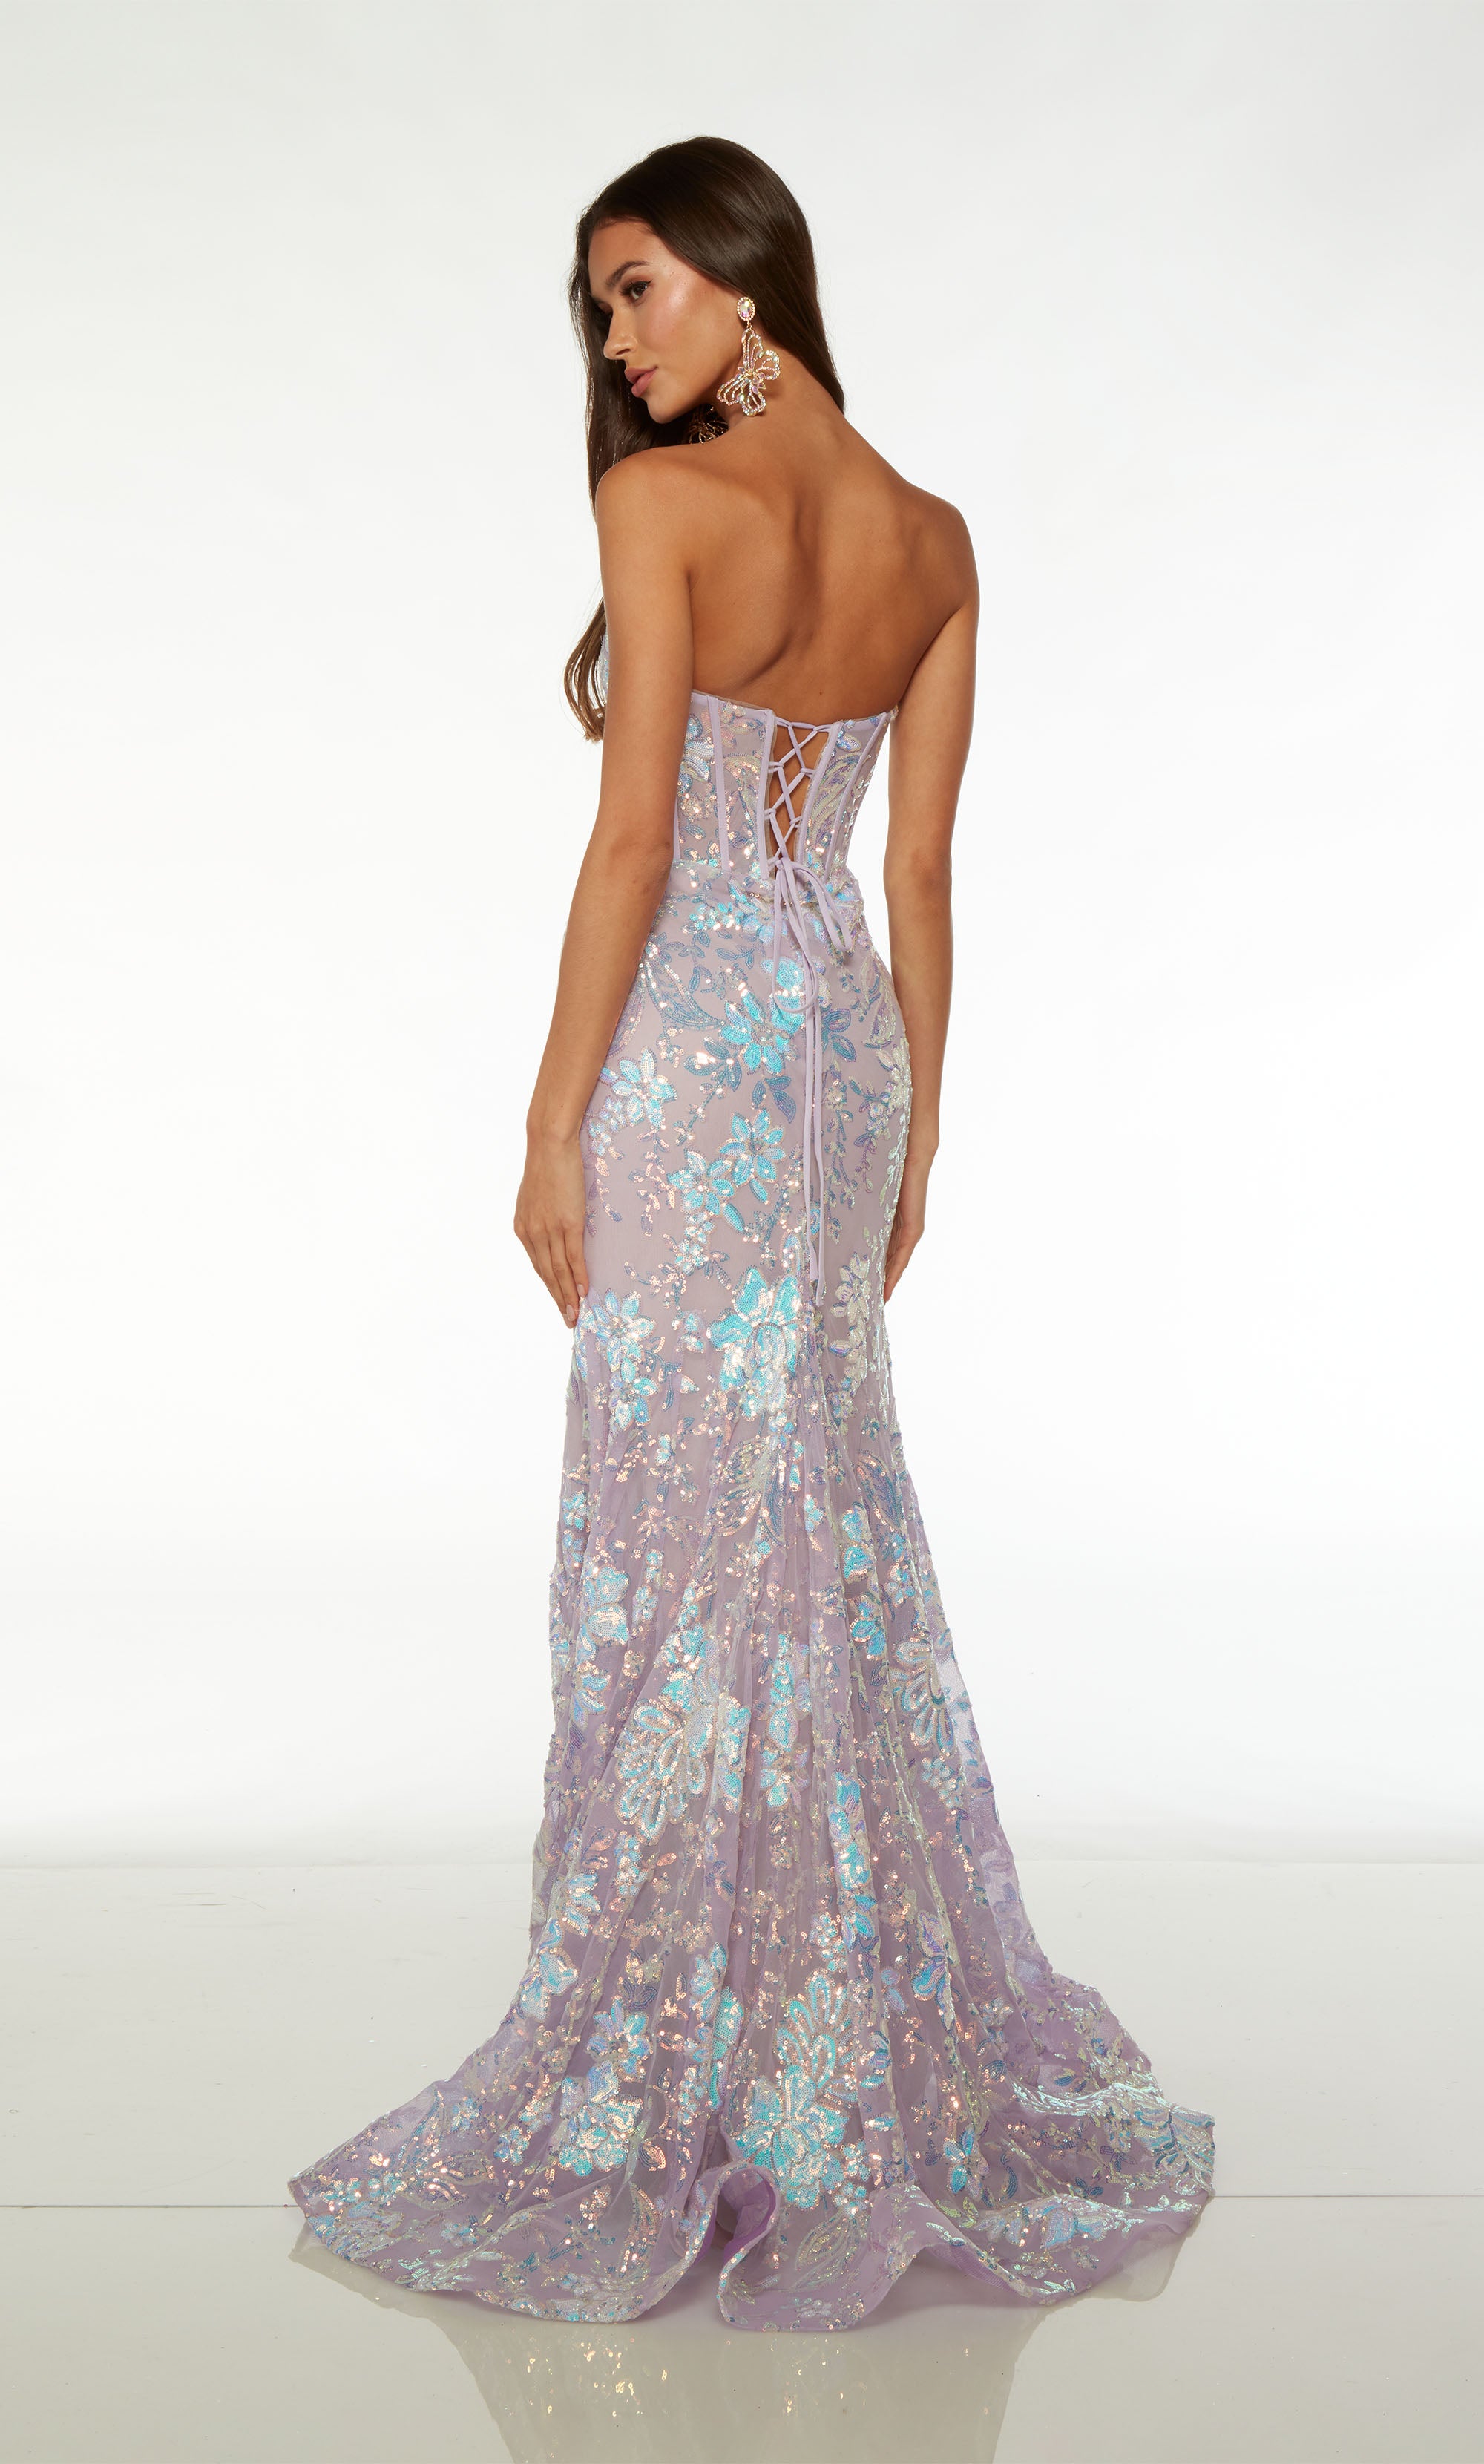 Strapless purple prom dress featuring an diamond keyhole corset top, lace-up back, train, and iridescent floral sequin designs for an captivating and elegant look.